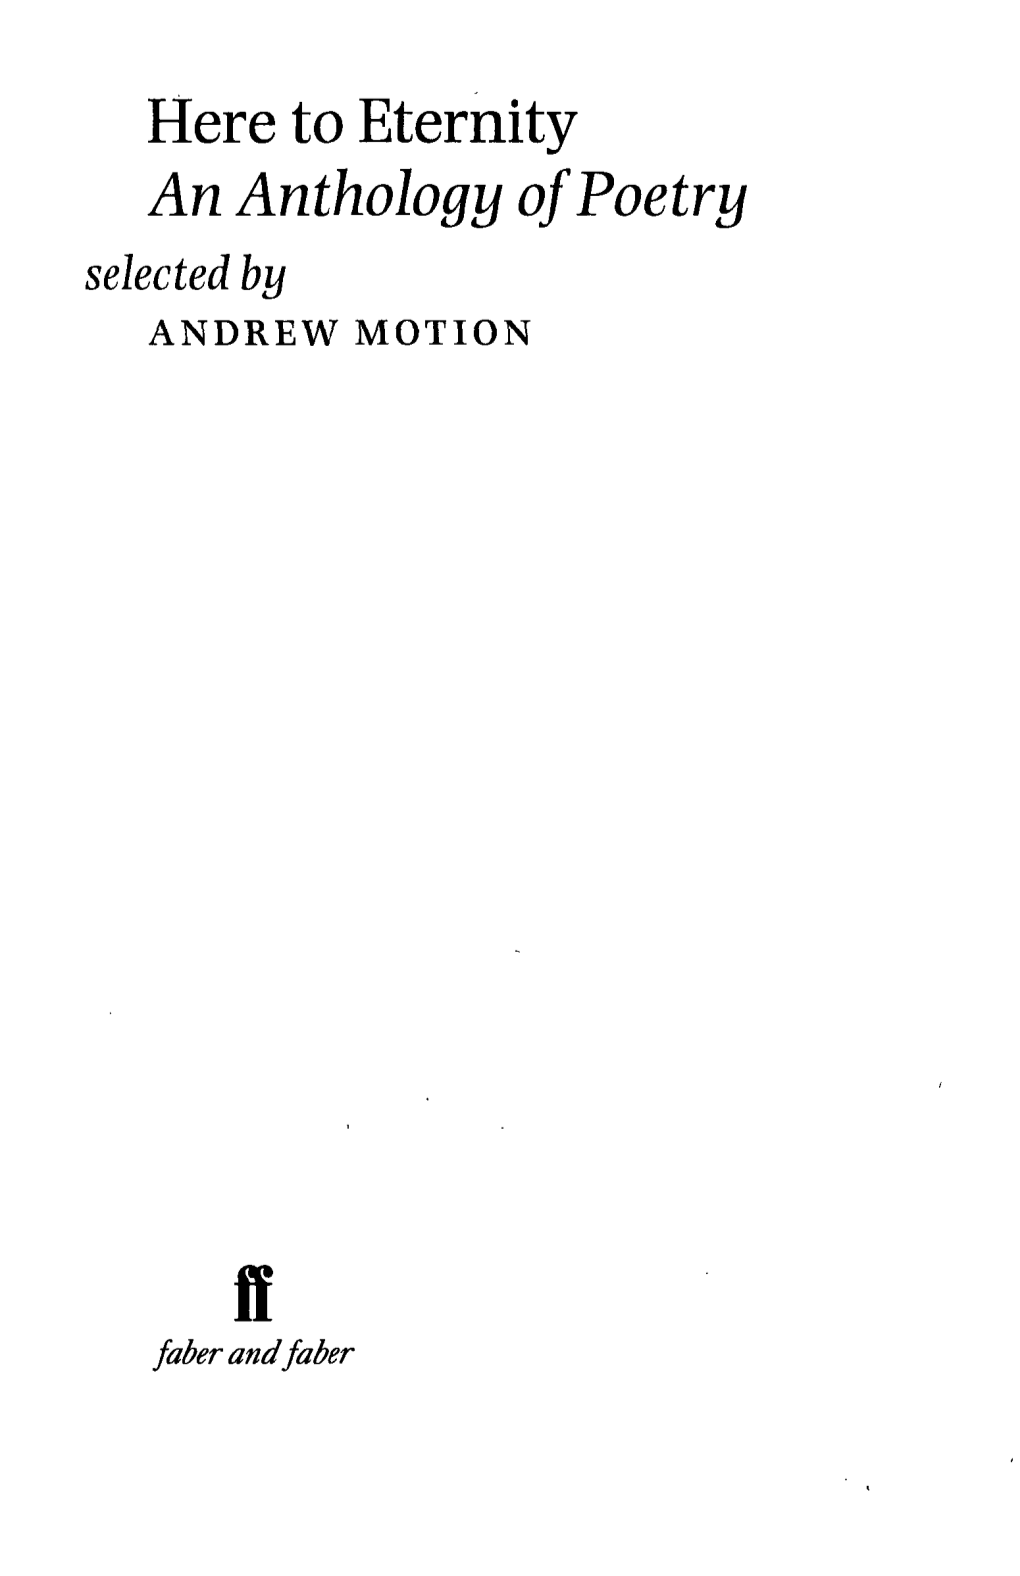 Here to Eternity an Anthology of Poetry Selected by ANDREW MOTION